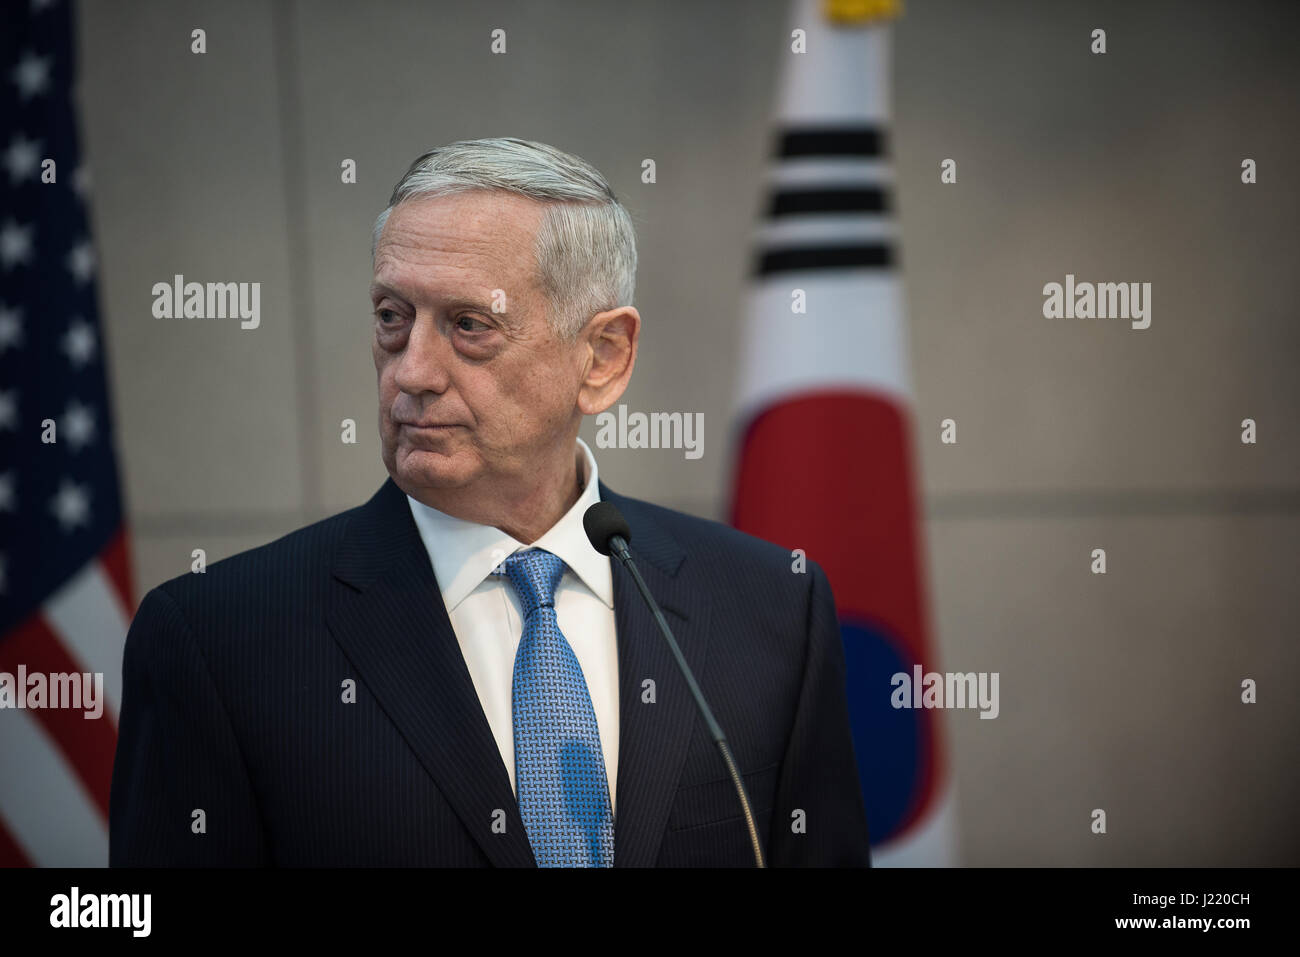 U.S. Secretary of Defense James Mattis speaks during a press conference at the Korean Ministry of National Defense February 3, 2017 in Seoul, South Korea.     (photo by Amber I. Smith/DoD via Planetpix) Stock Photo